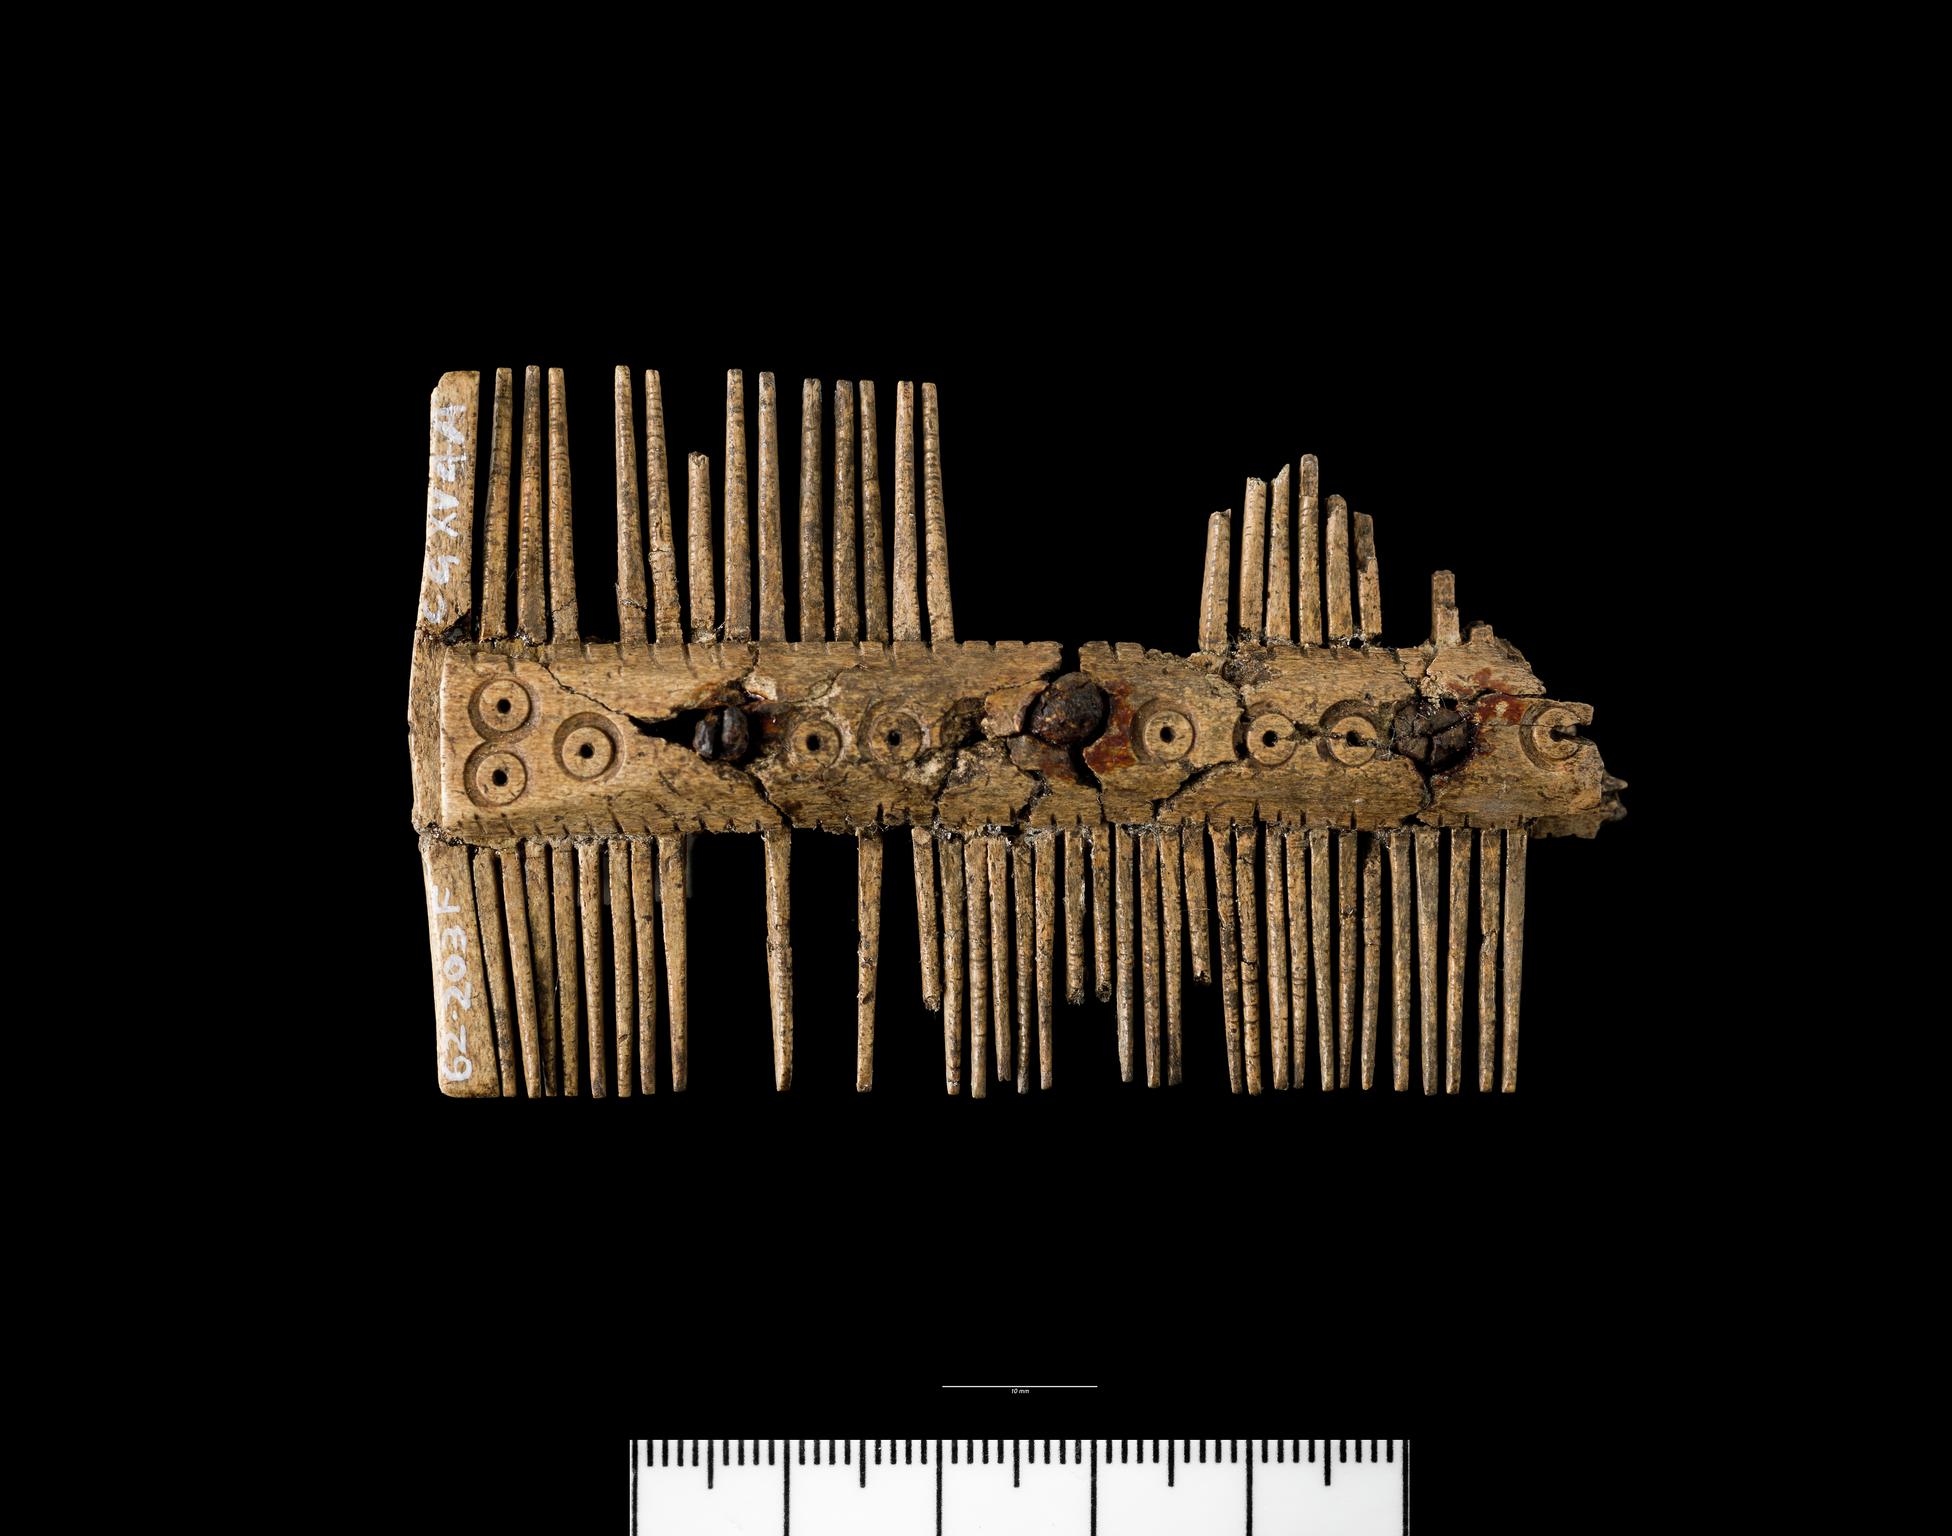 Early Medieval bone comb